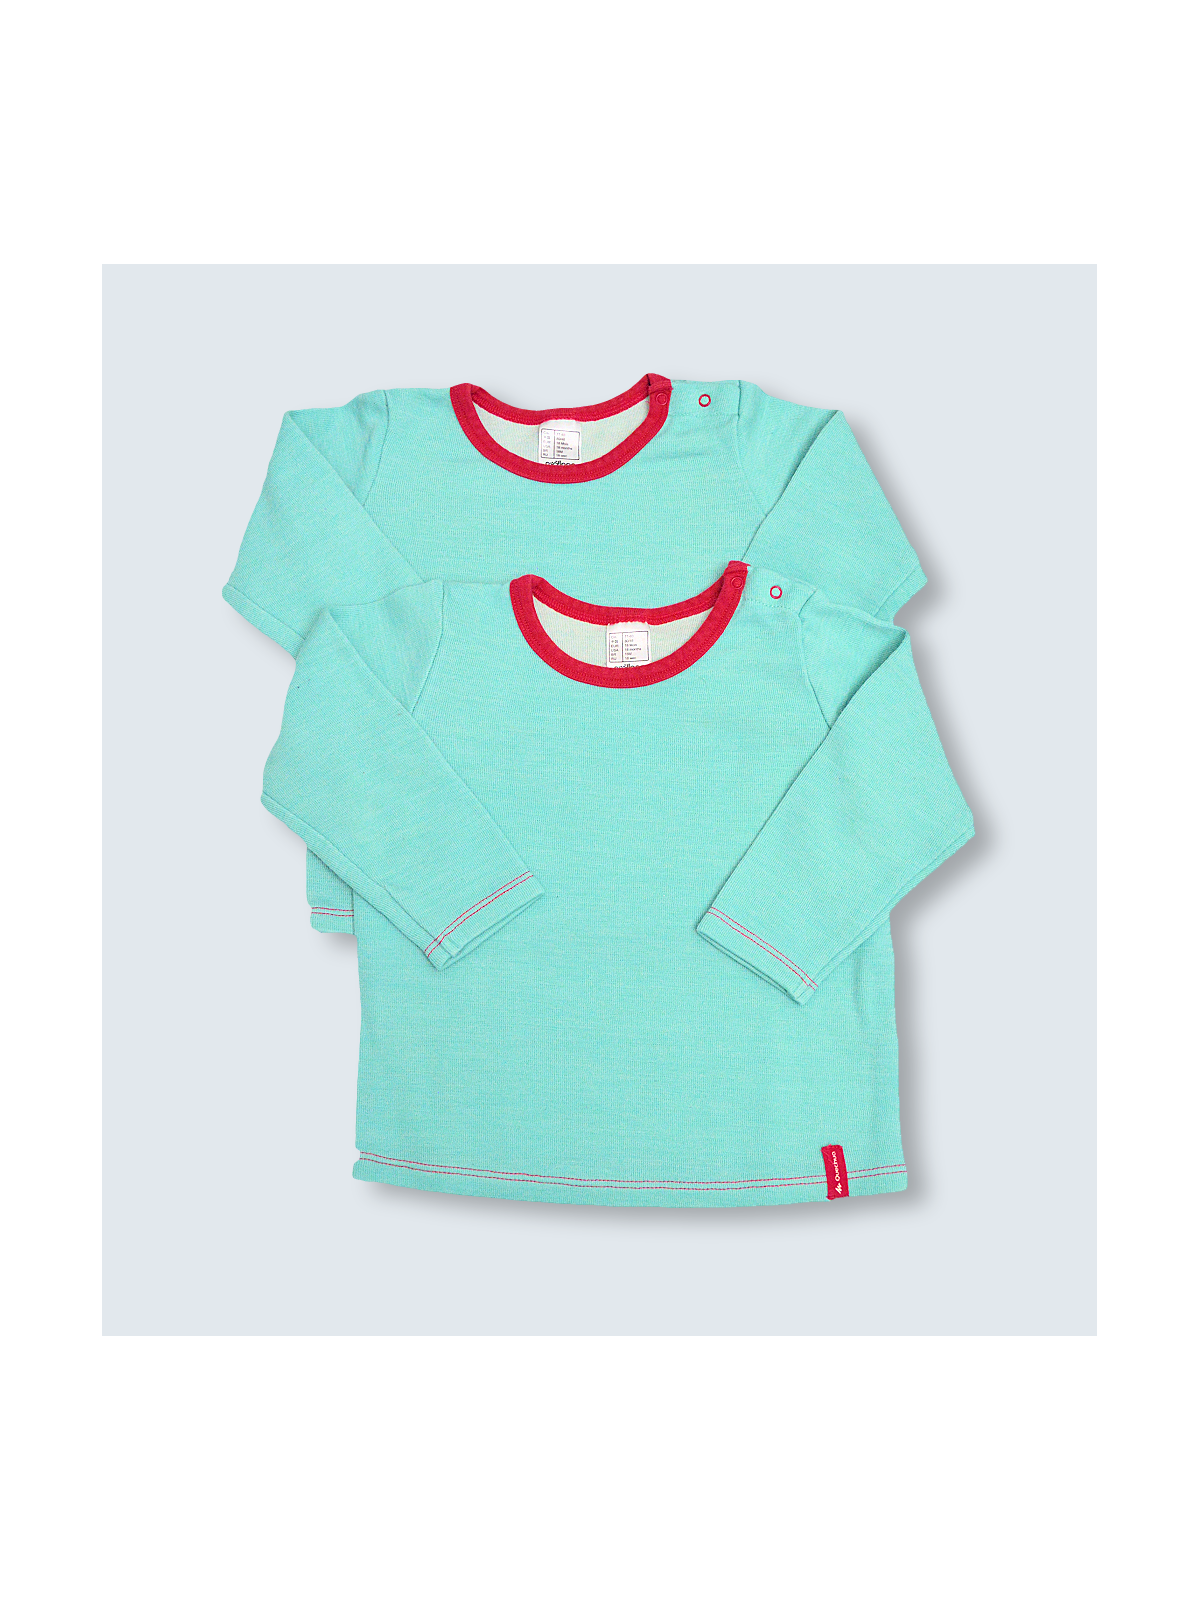 Pull d'occasion Oxylane 18 Mois pour fille.